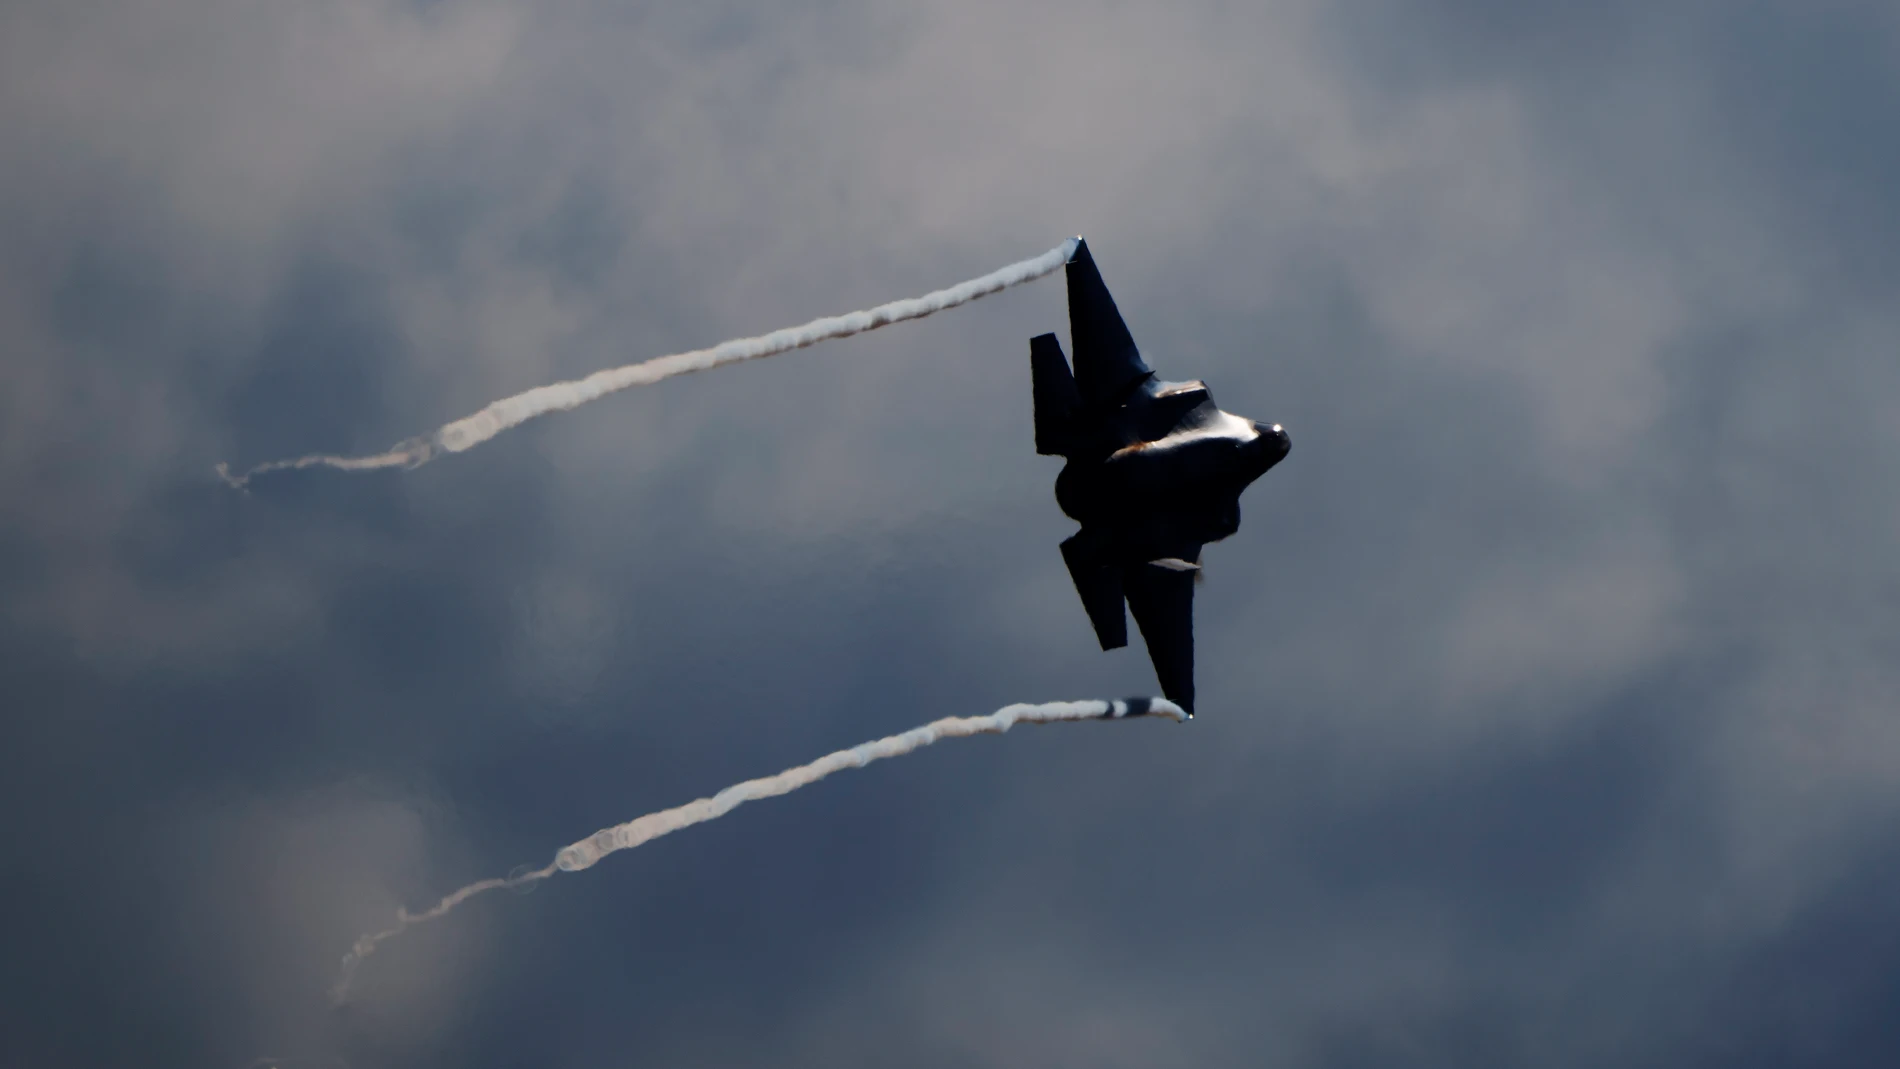 Skrydstrup Afb (Denmark), 10/03/2023.- A USAF in Europe F-35A Lightning II fighter jet produces condensation trails while flying over on the occasion of a visit of five USAF in Europe F-35 fighter jets of the 48th Fighter Wing based at the RAF base Lakenheath in the UK, at the Danish Fighter Wing Airbase Skrydstrup, in Jutland, Denmark, 10 March 2023. The visit is part of preparations for the arrival of F-35 'Lightning' fighter jets for the Danish Air Force scheduled for autumn 2023. (Dinamarca, Estados Unidos) EFE/EPA/Bo Amstrup DENMARK OUT 